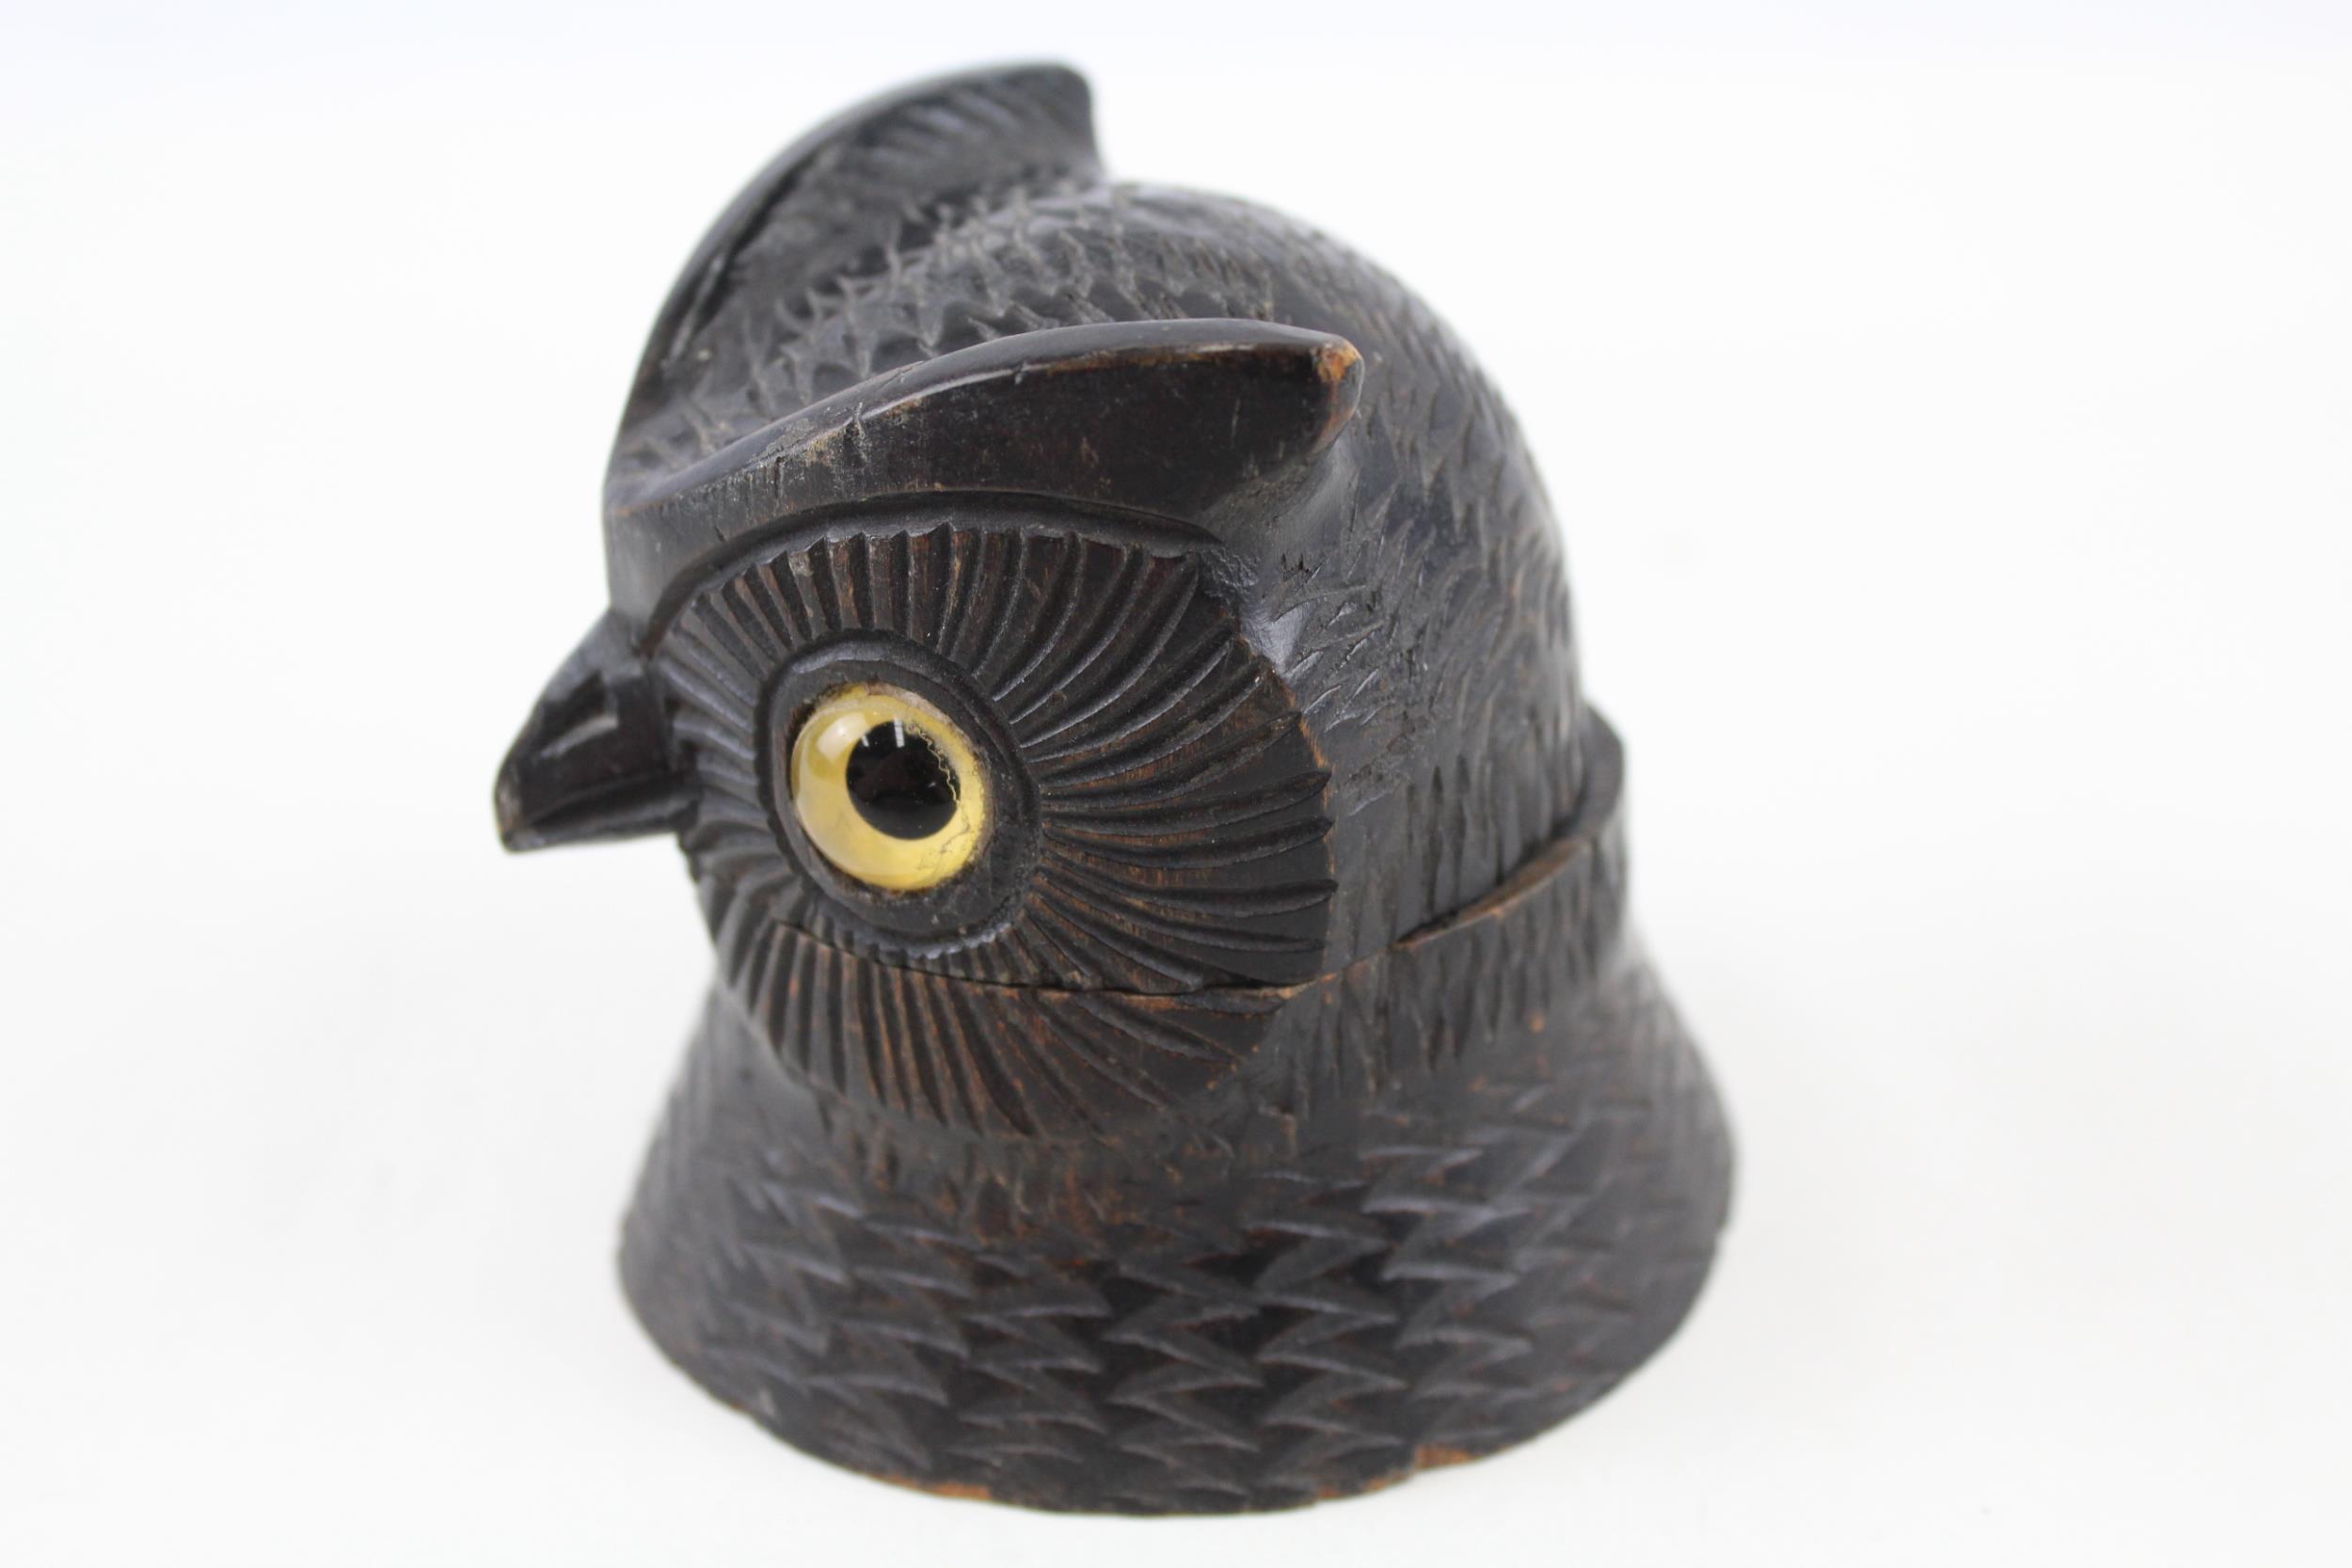 Antique 19th Century Black Forest Carved Wood Owl Head Inkwell - Height - 7.8cm In antique condition - Image 3 of 5